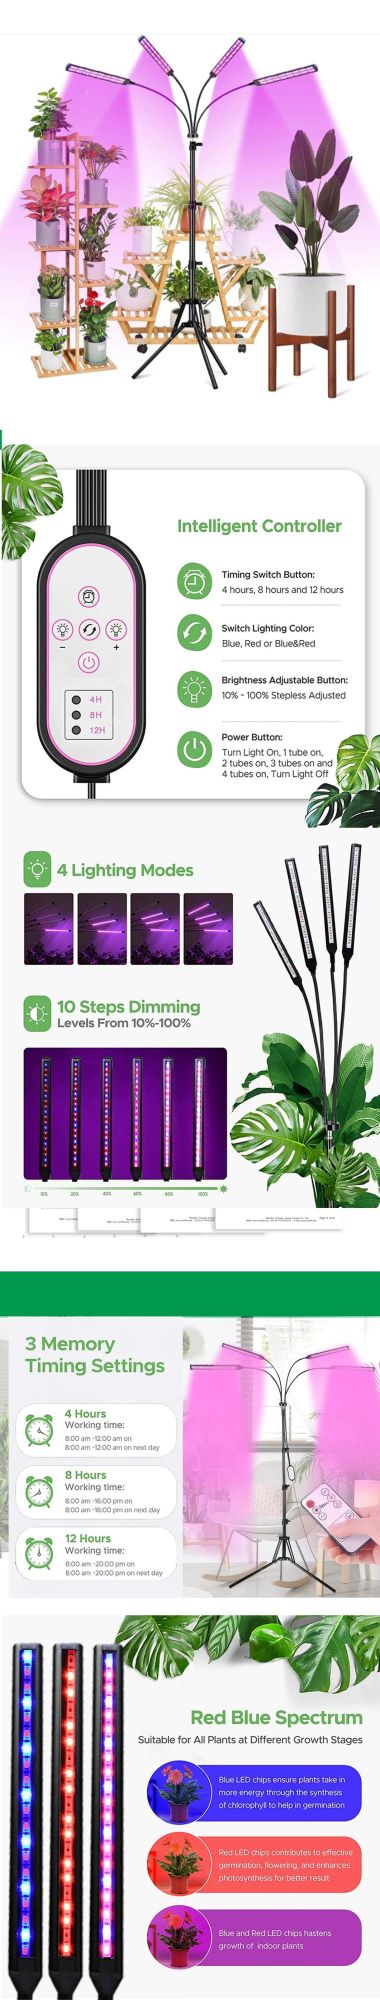 Desktop LED Plant Grow Light Three Tube Timing Dimmable Full Spectrum LED Grow Light for Home and Office Indoor Plants